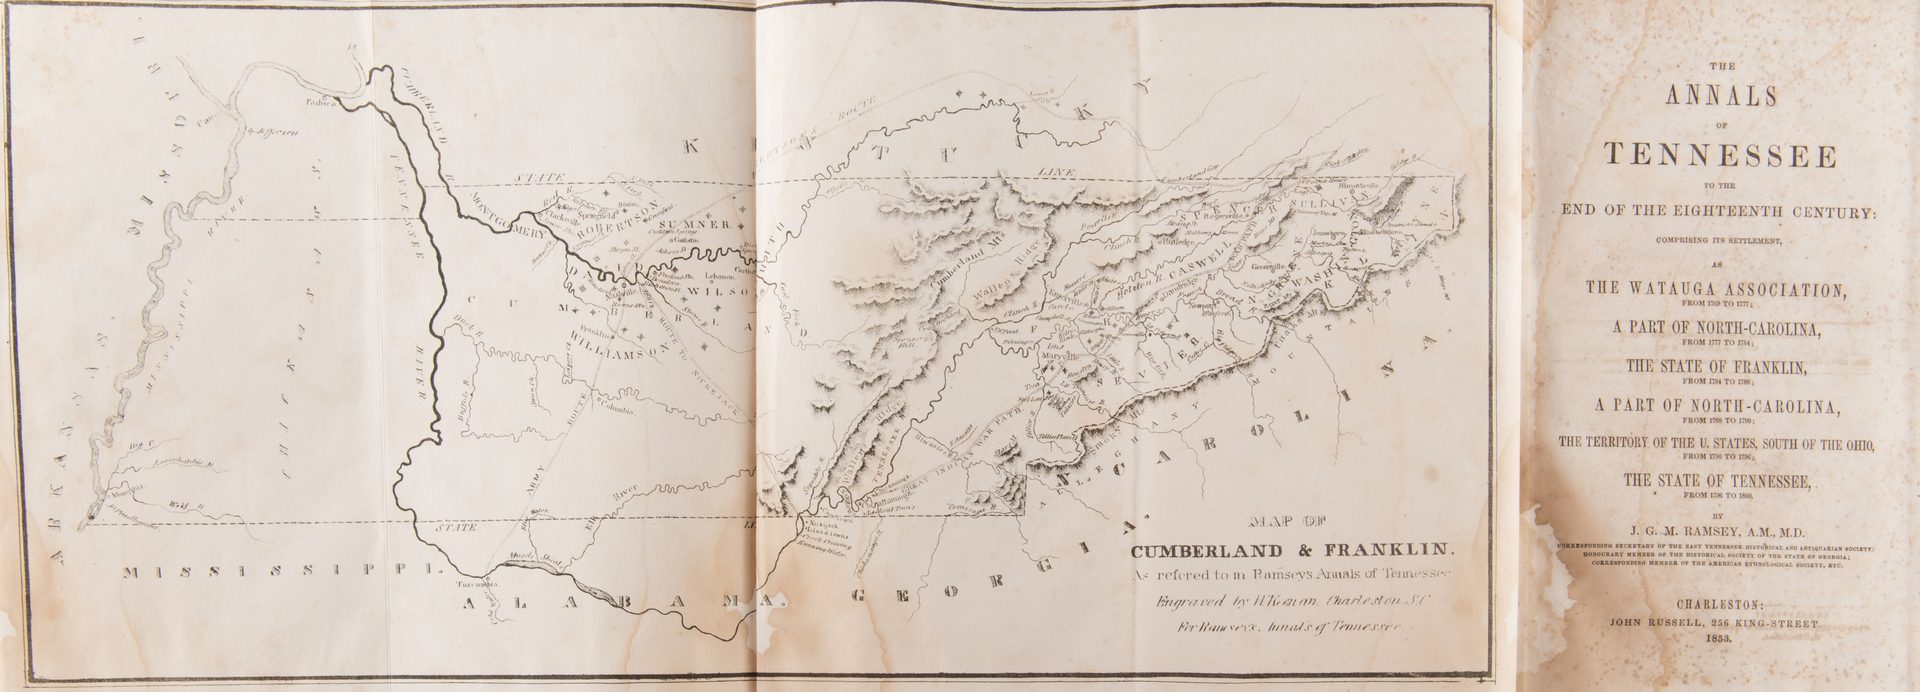 Lot 860: Ramsey's Annals of Tennessee 1853 Charleston inc. Map